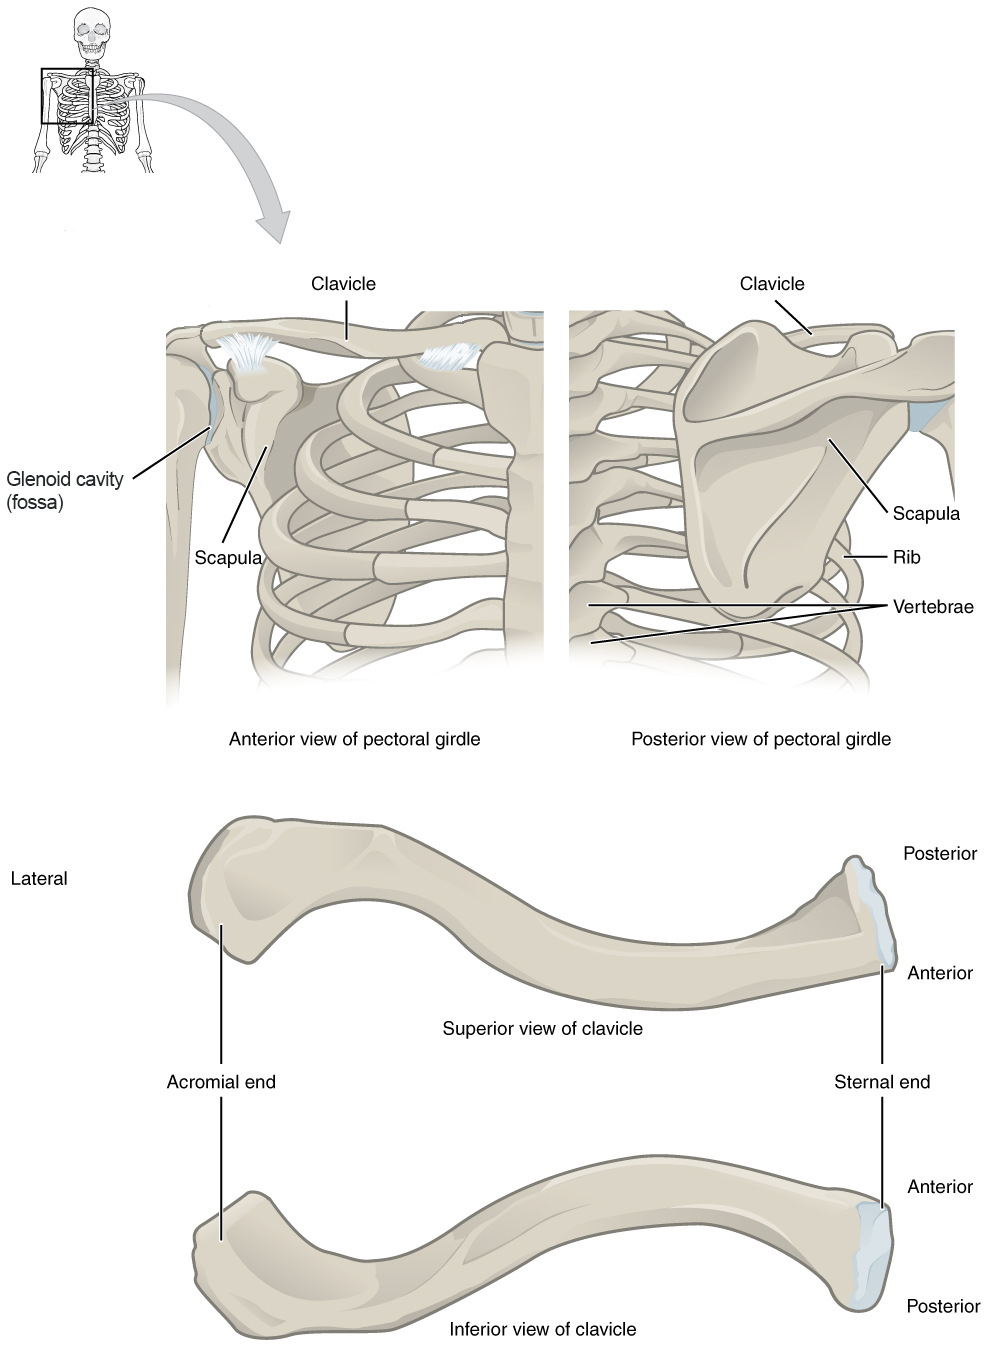 Anterior and posterior views of pectoral girdle and isolated clavicles.